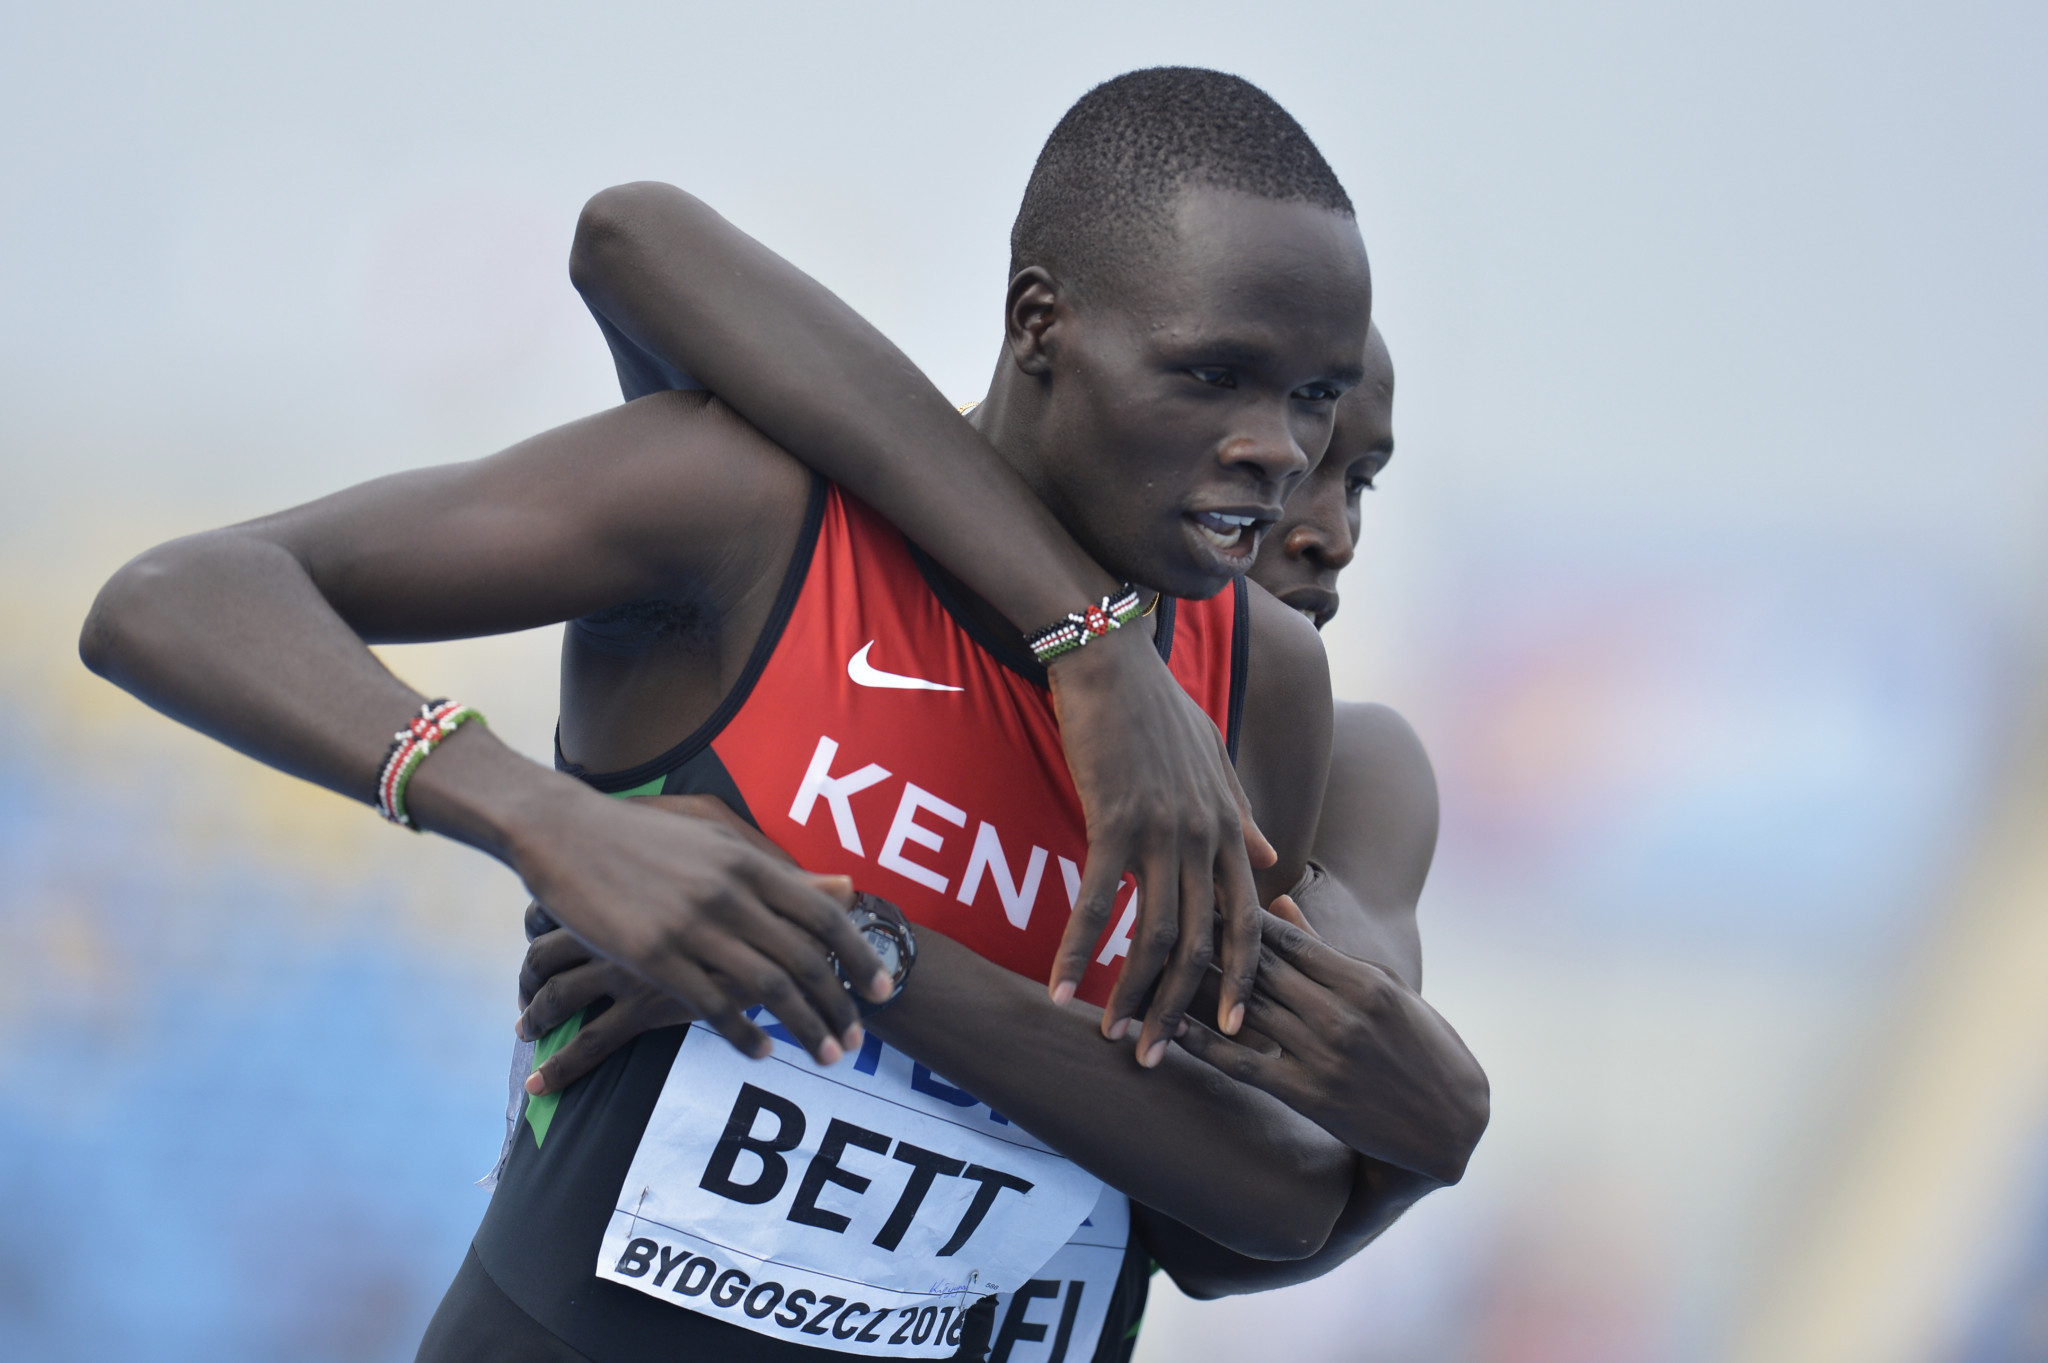 Kenya's doping crisis has deepened after world 800 metres bronze medallist Kipyegon Bett tested positive for EPO ©Getty Images